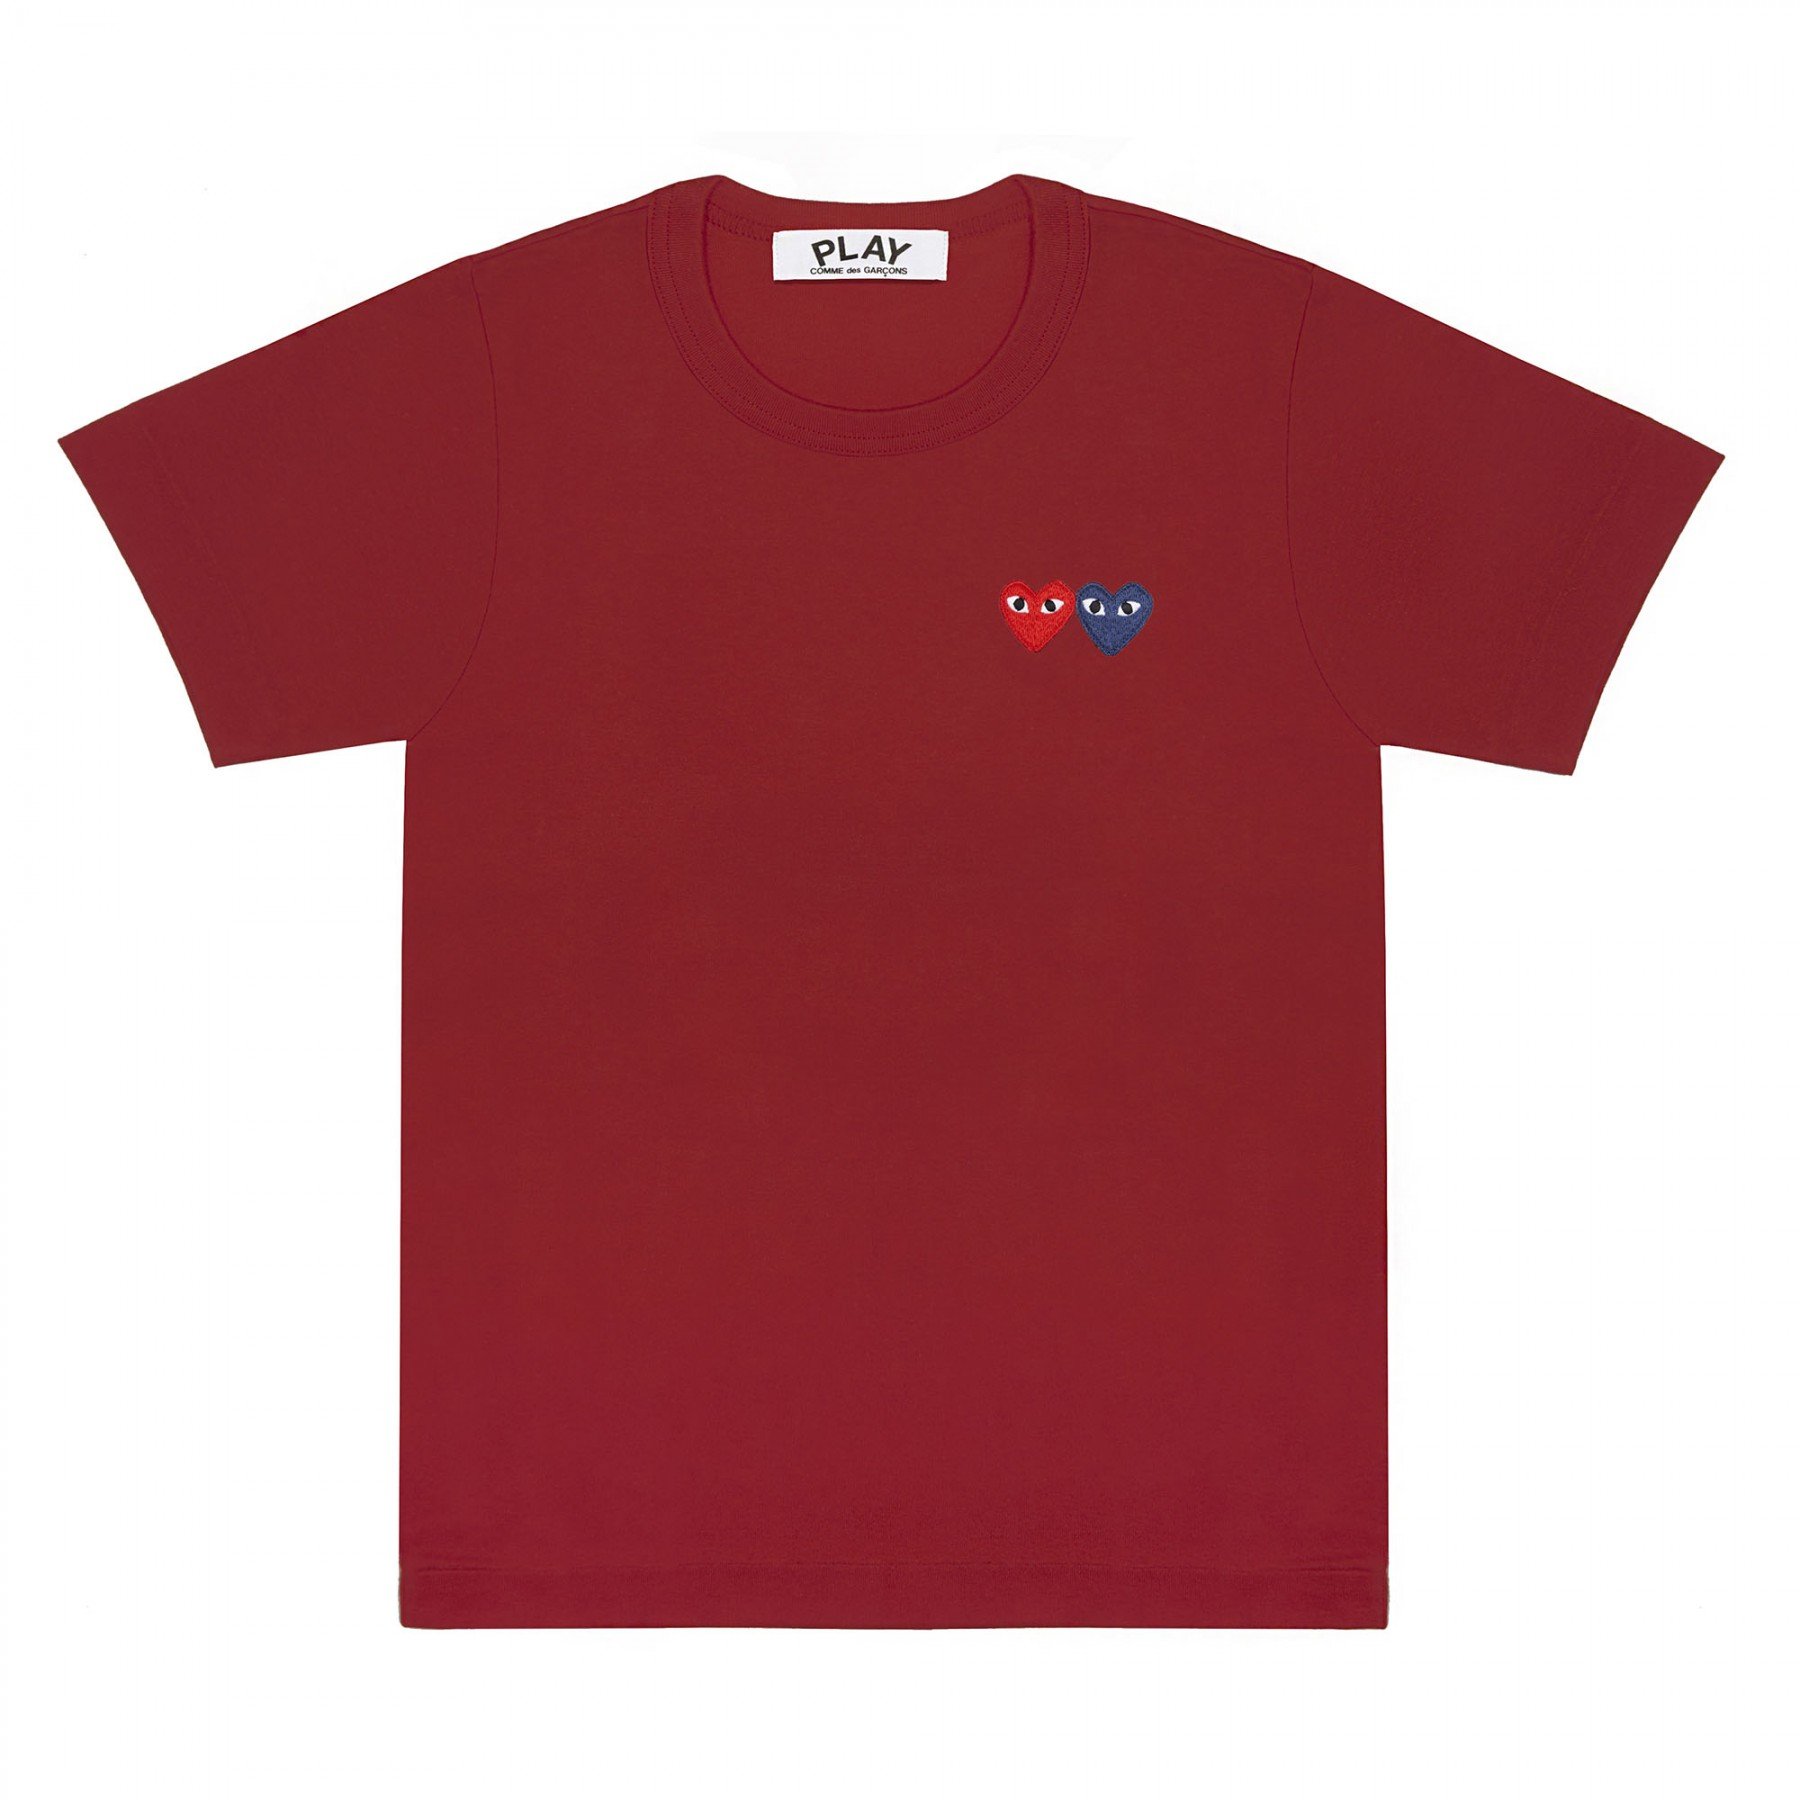 Comme des Garcon Burgundy Mens Play T Shirt With Double Heart 